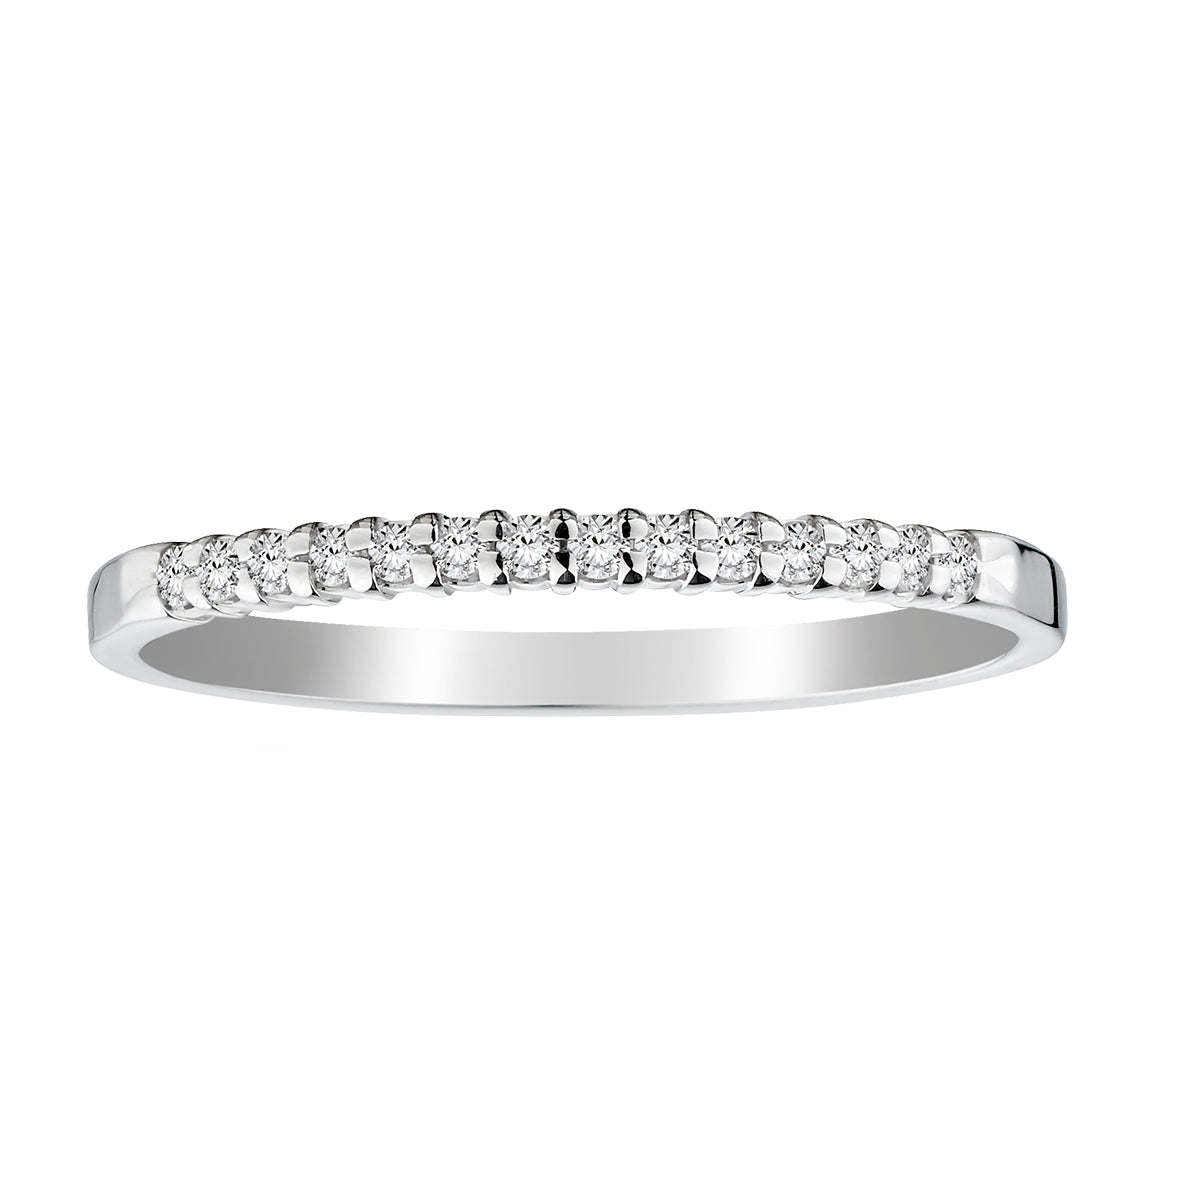 .11 Carat of Diamonds Band Ring, Silver.......................NOW